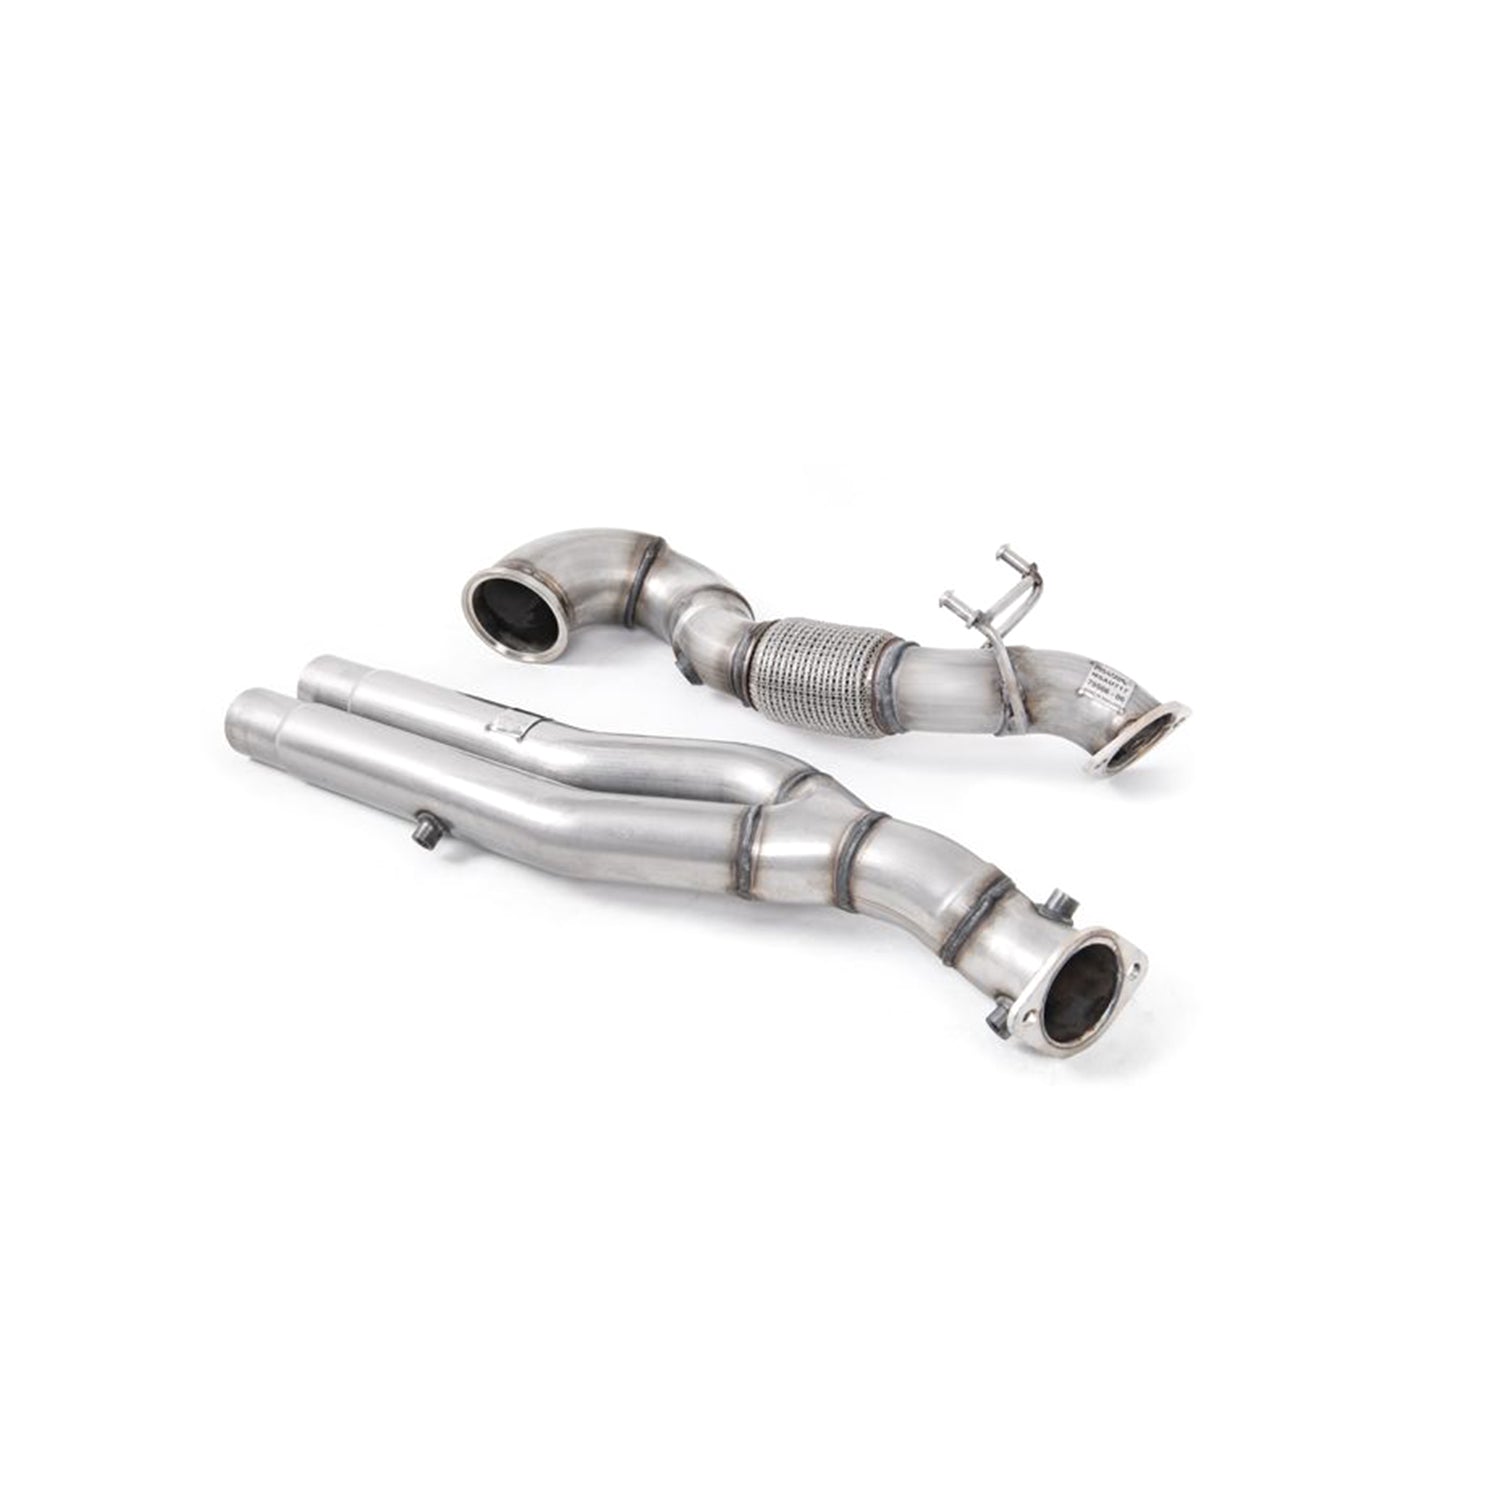 Milltek Sport Audi RS3 Saloon Large Bore Downpipe & Decat Exhaust With GPF Bypass (8Y)-R44 Performance